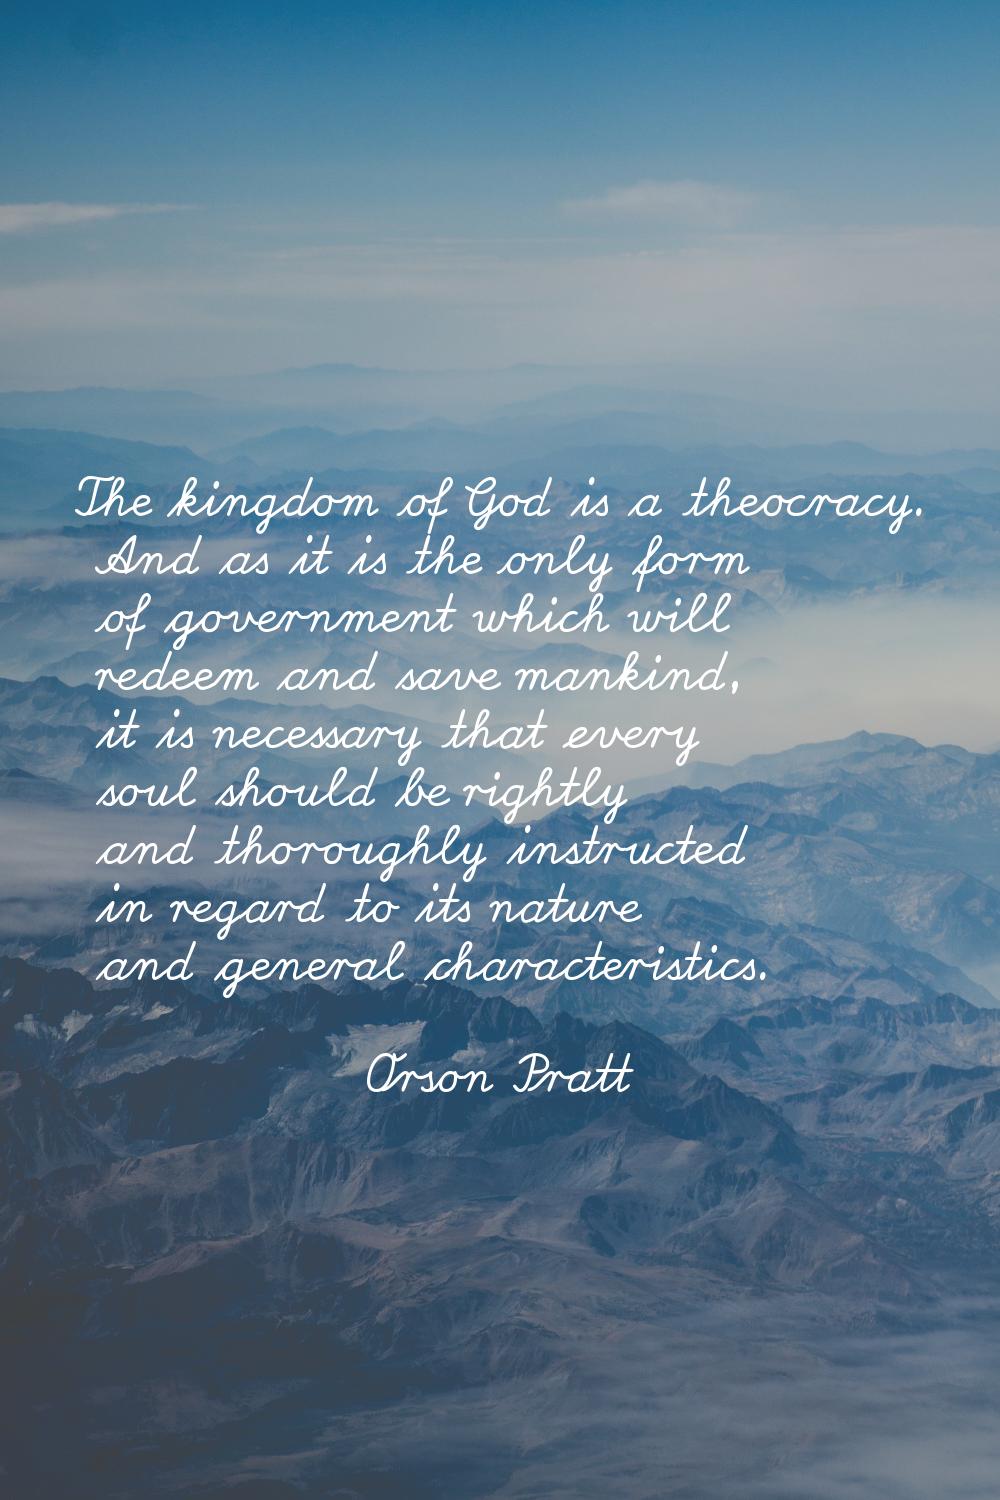 The kingdom of God is a theocracy. And as it is the only form of government which will redeem and s